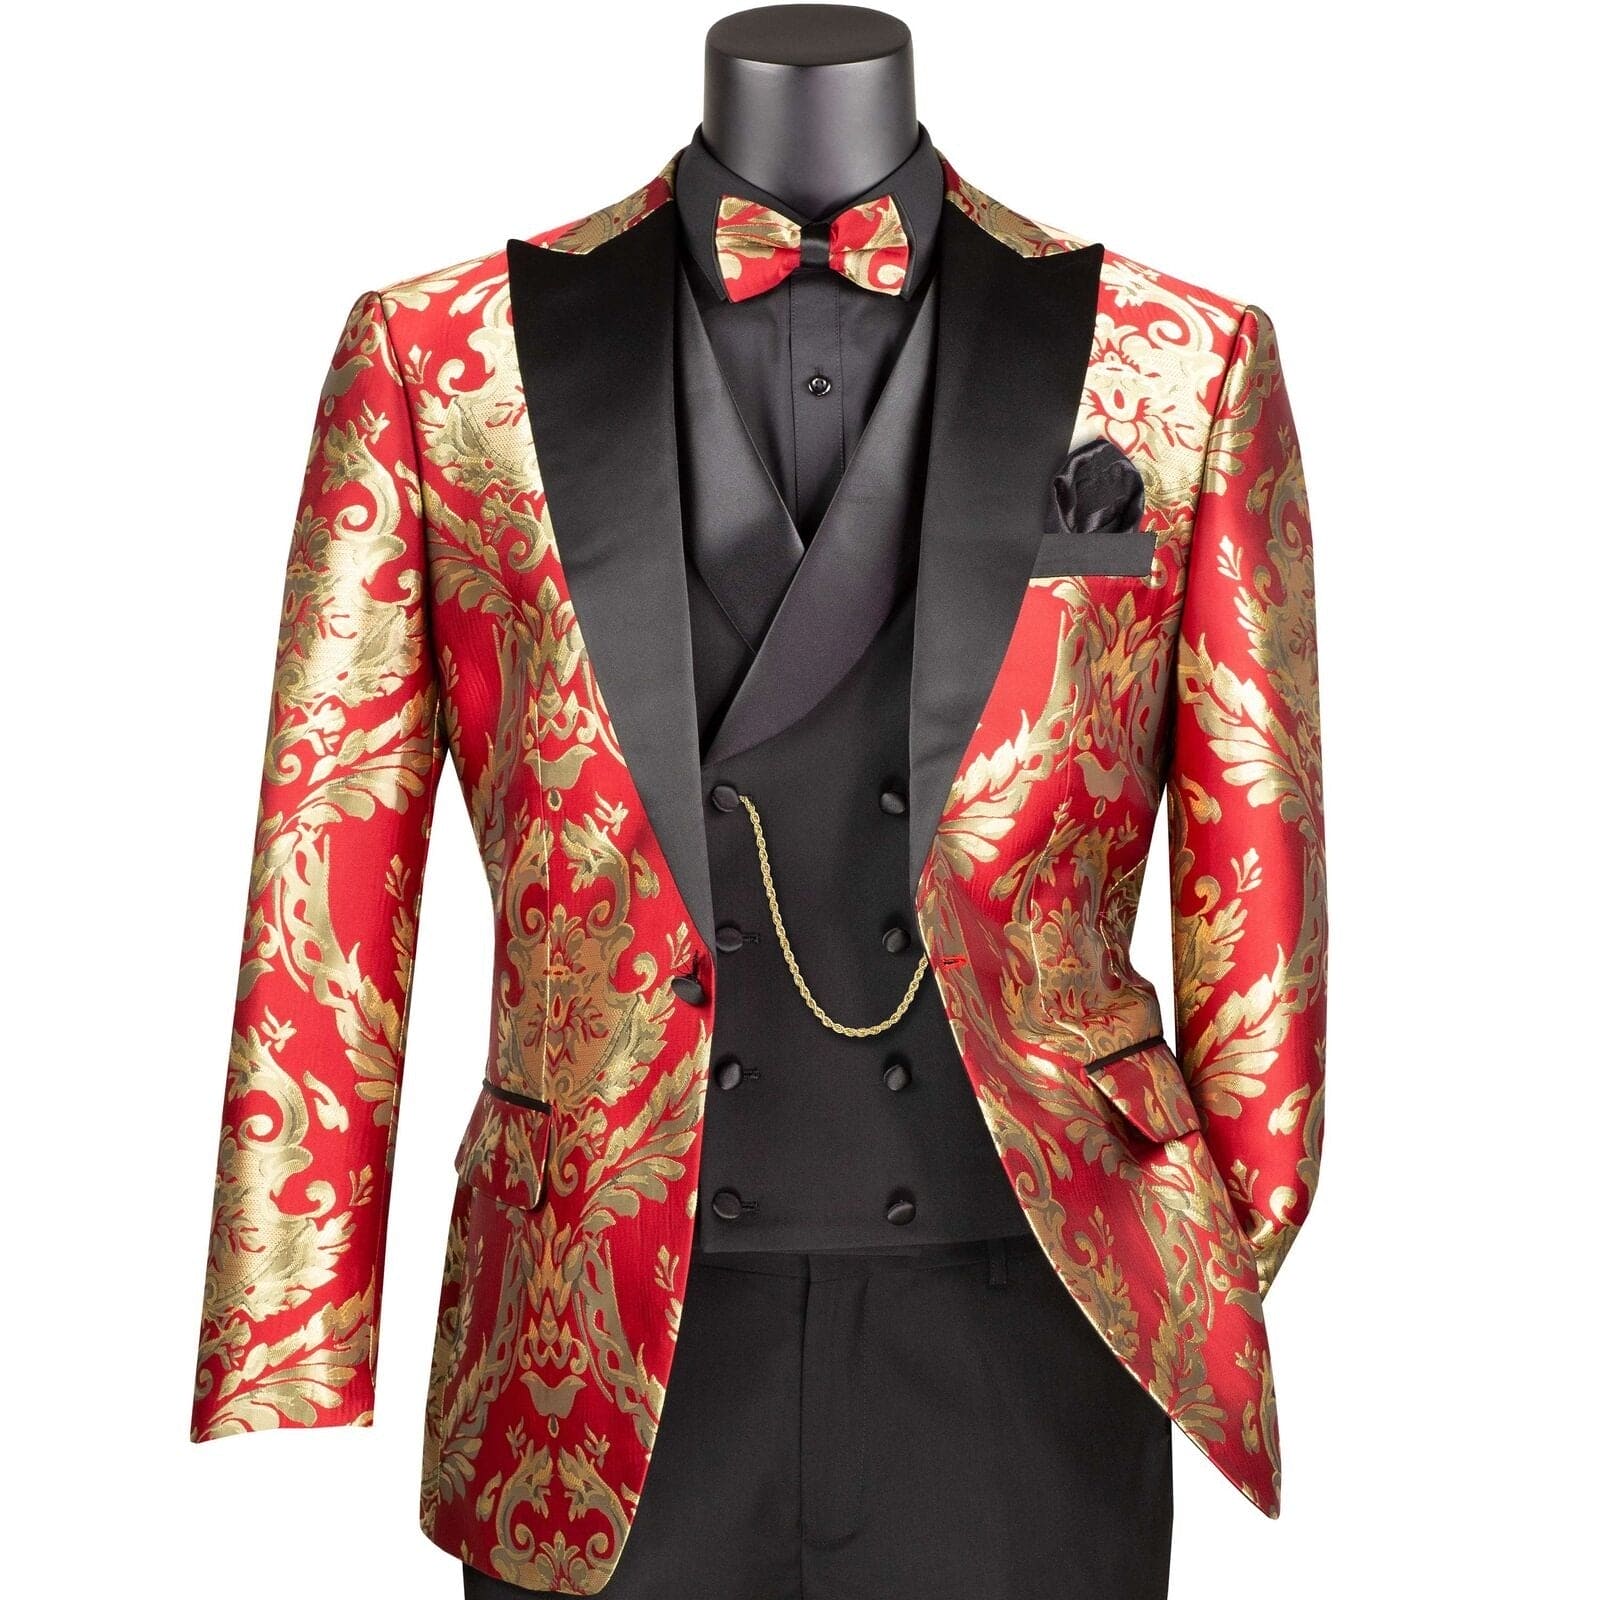 Cheap Black Trim Fit Mens Suit Set Gold Peaked Lapel One Button Prom Jacket  Custom Made Formal Jumpsuit From Dresstop, $76.77